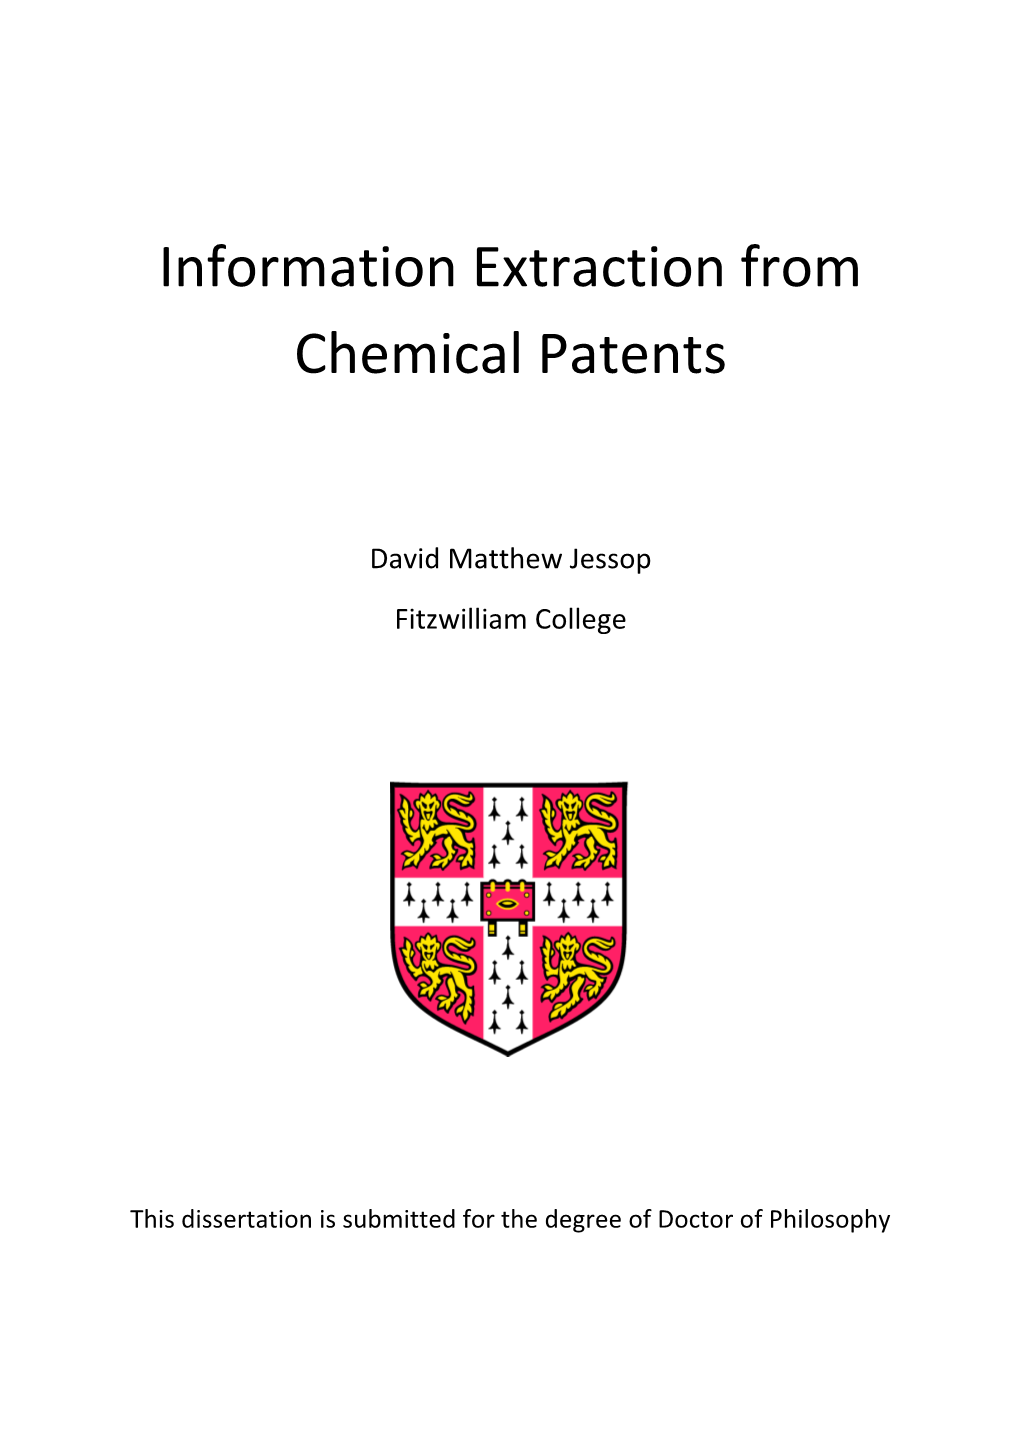 Information Extraction from Chemical Patents